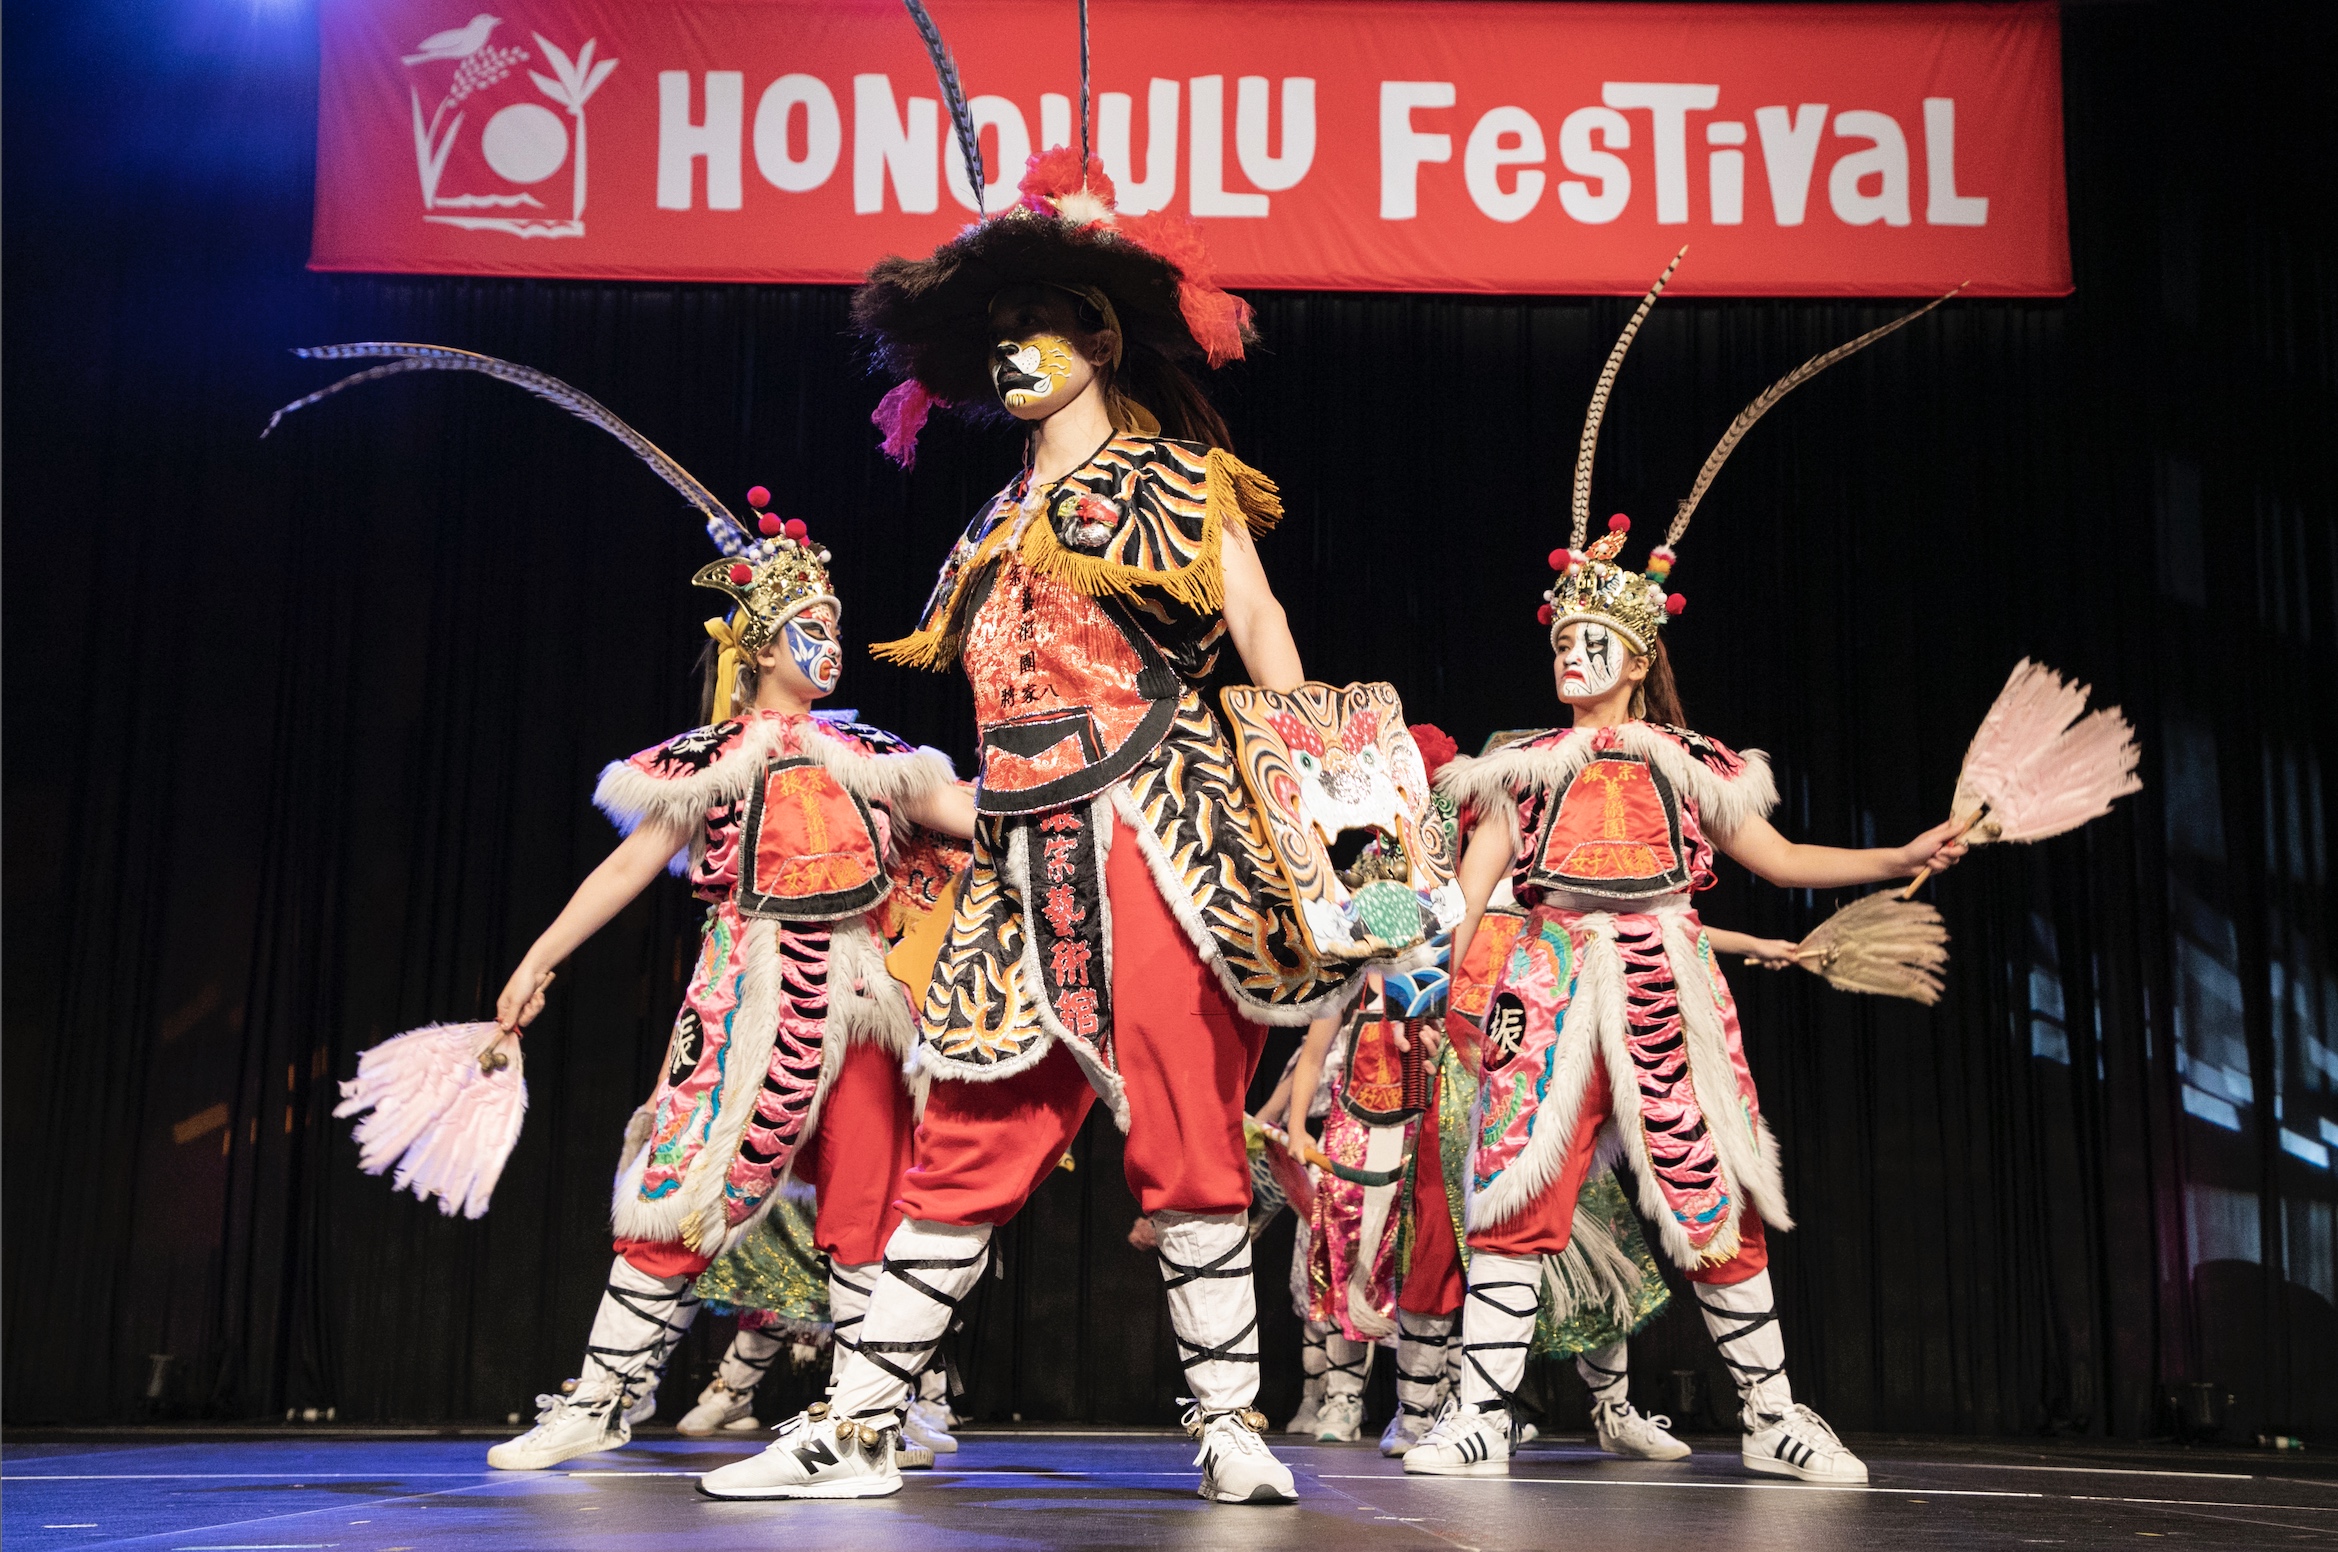 Exciting cultural acts from await attendees at four different stage locations during the Honolulu Festival.